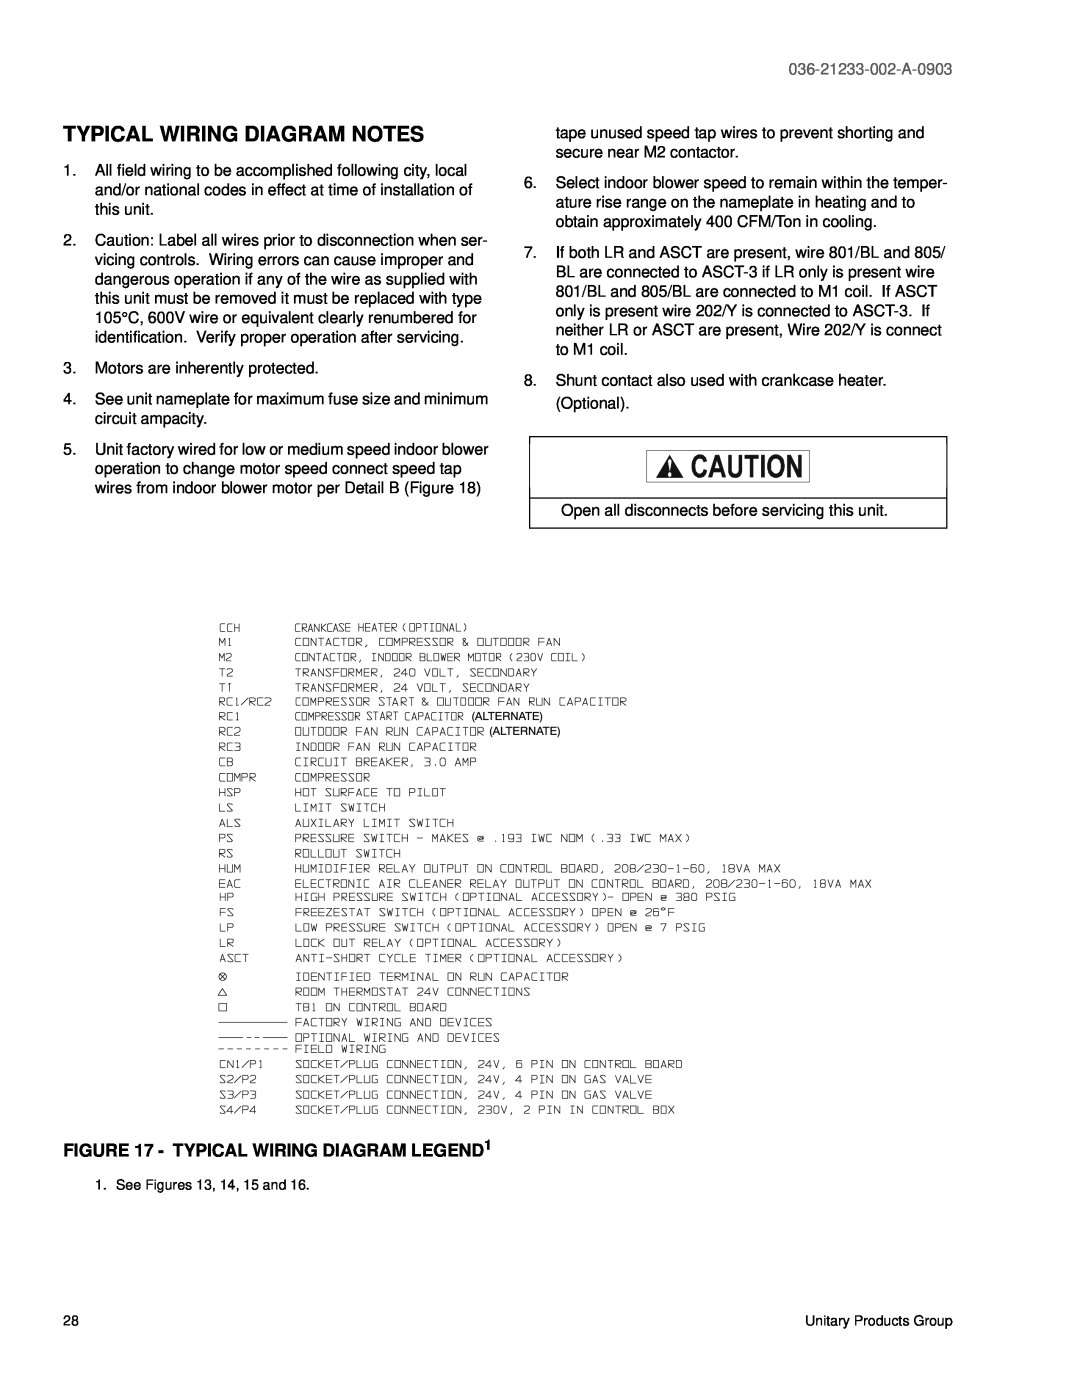 York DNH018 warranty Typical Wiring Diagram Notes, Alternate, 036-21233-002-A-0903 